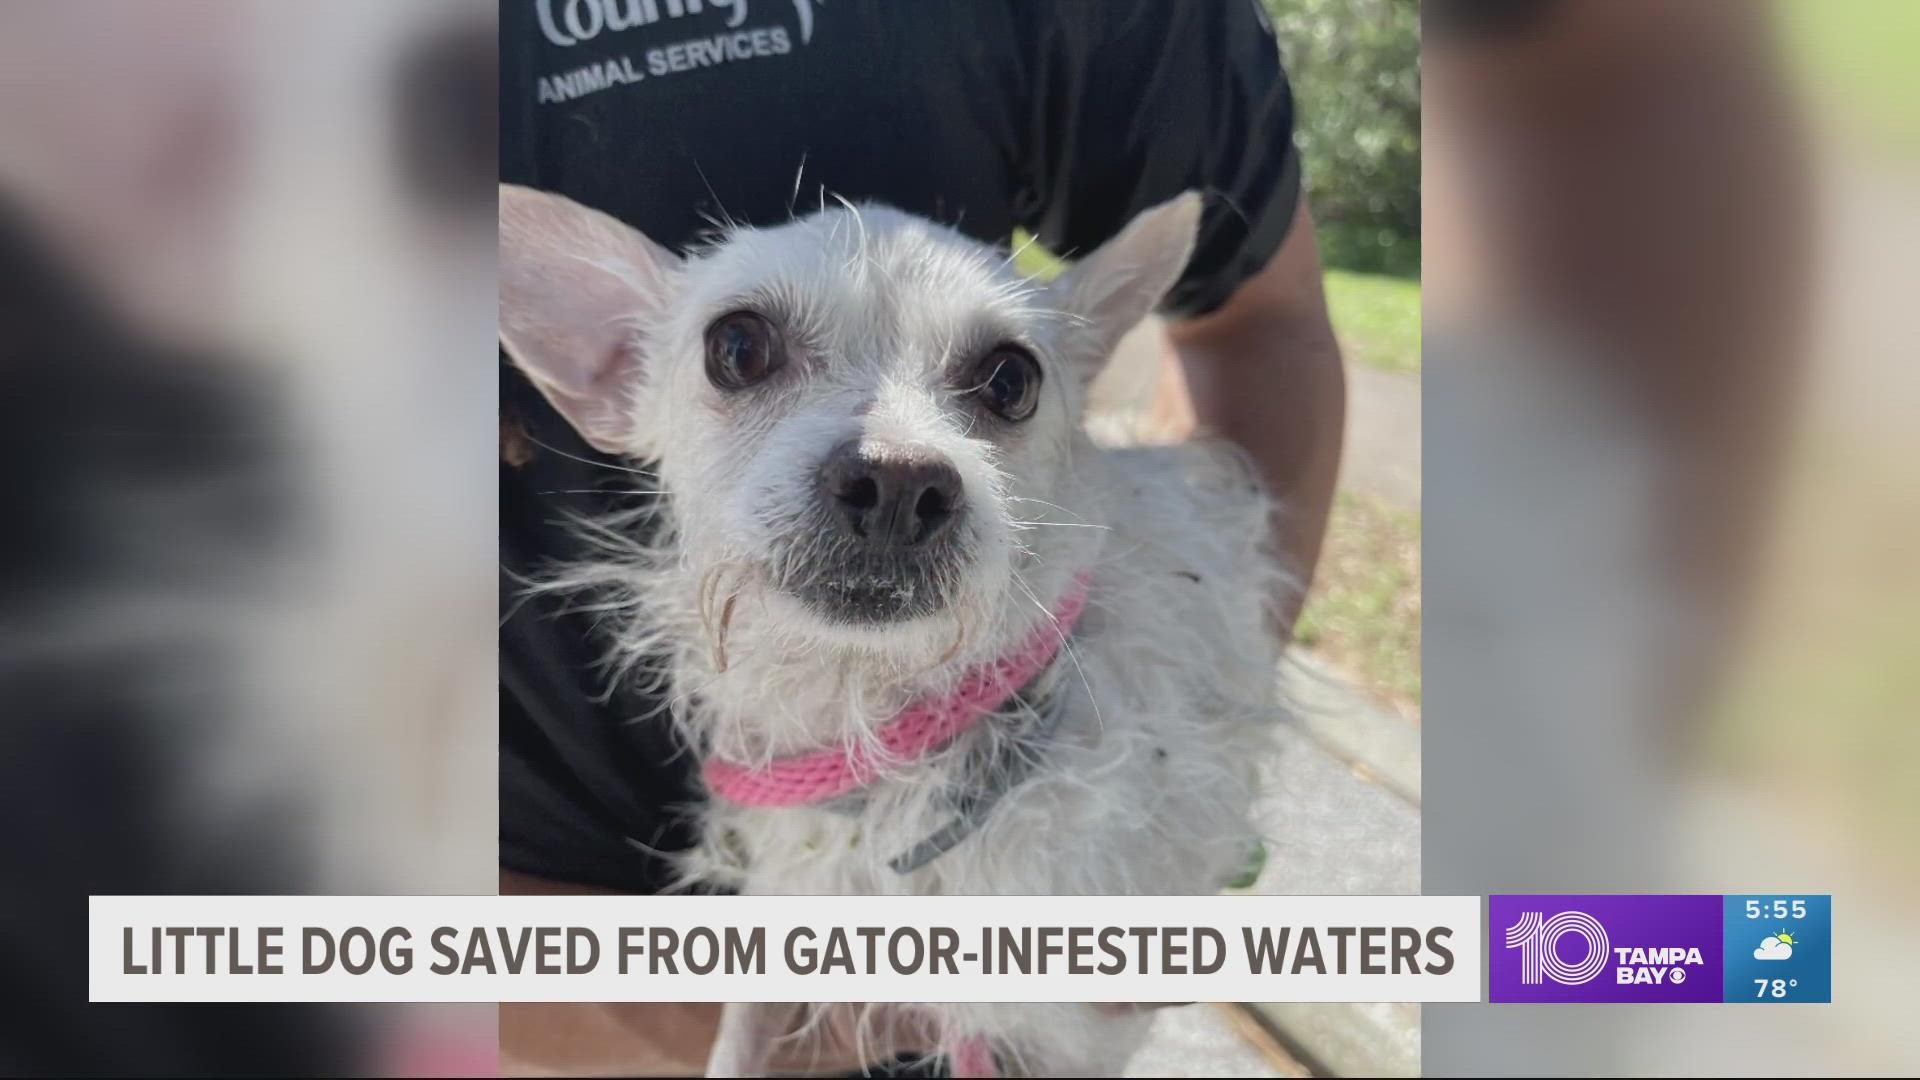 The officer said they don't know how long the dog was stranded at the park before being rescued.